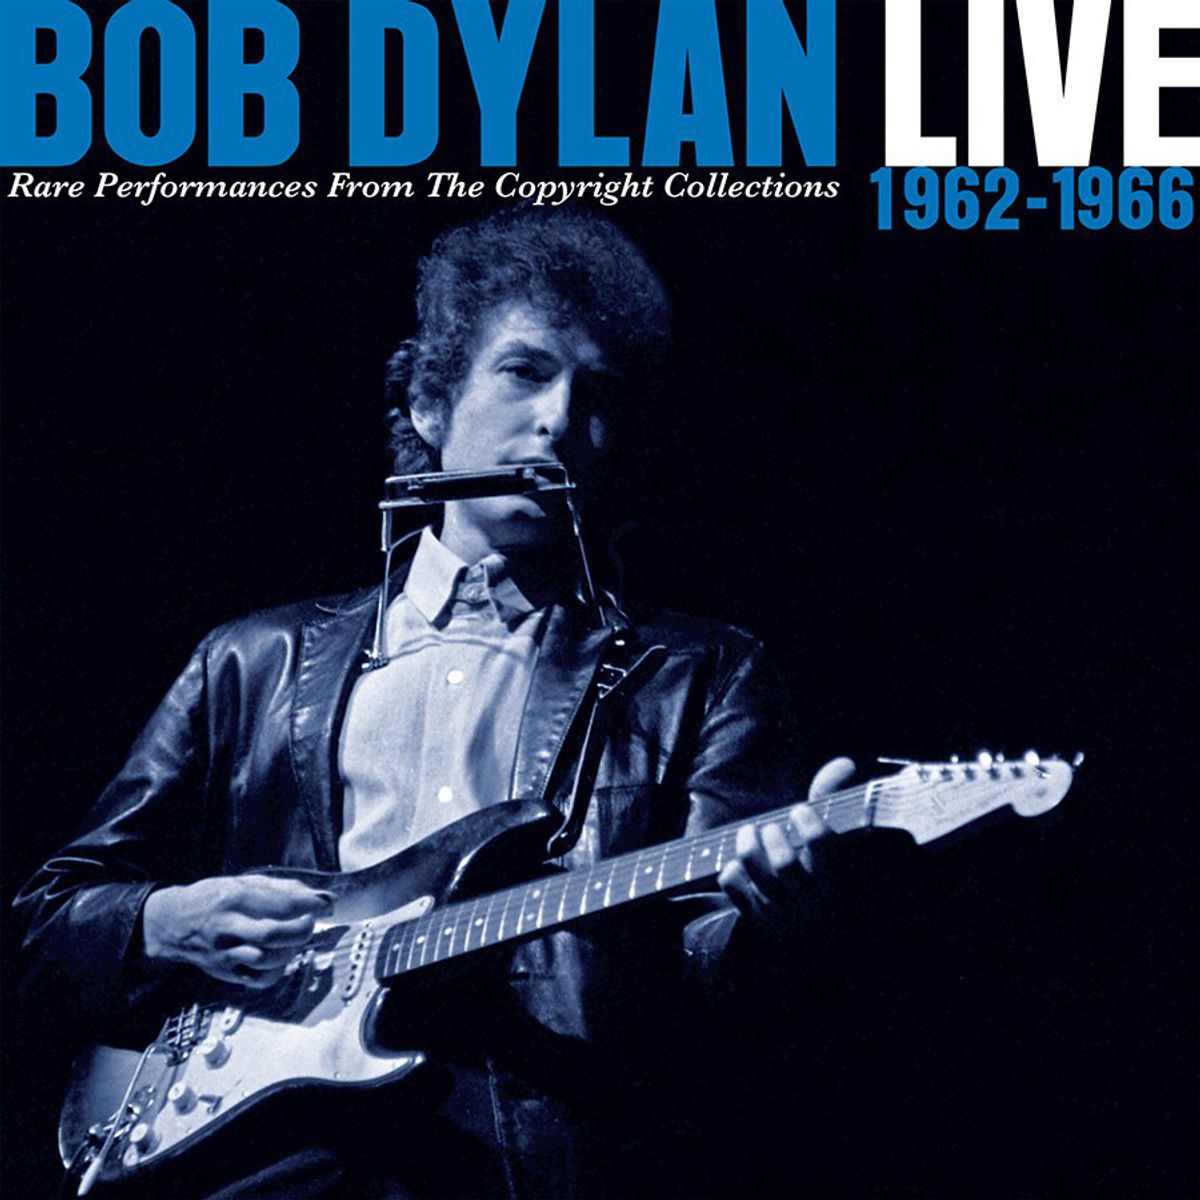 Bob Dylan 'Live 1962-1966 Rare Performances From The Copyright Collections'